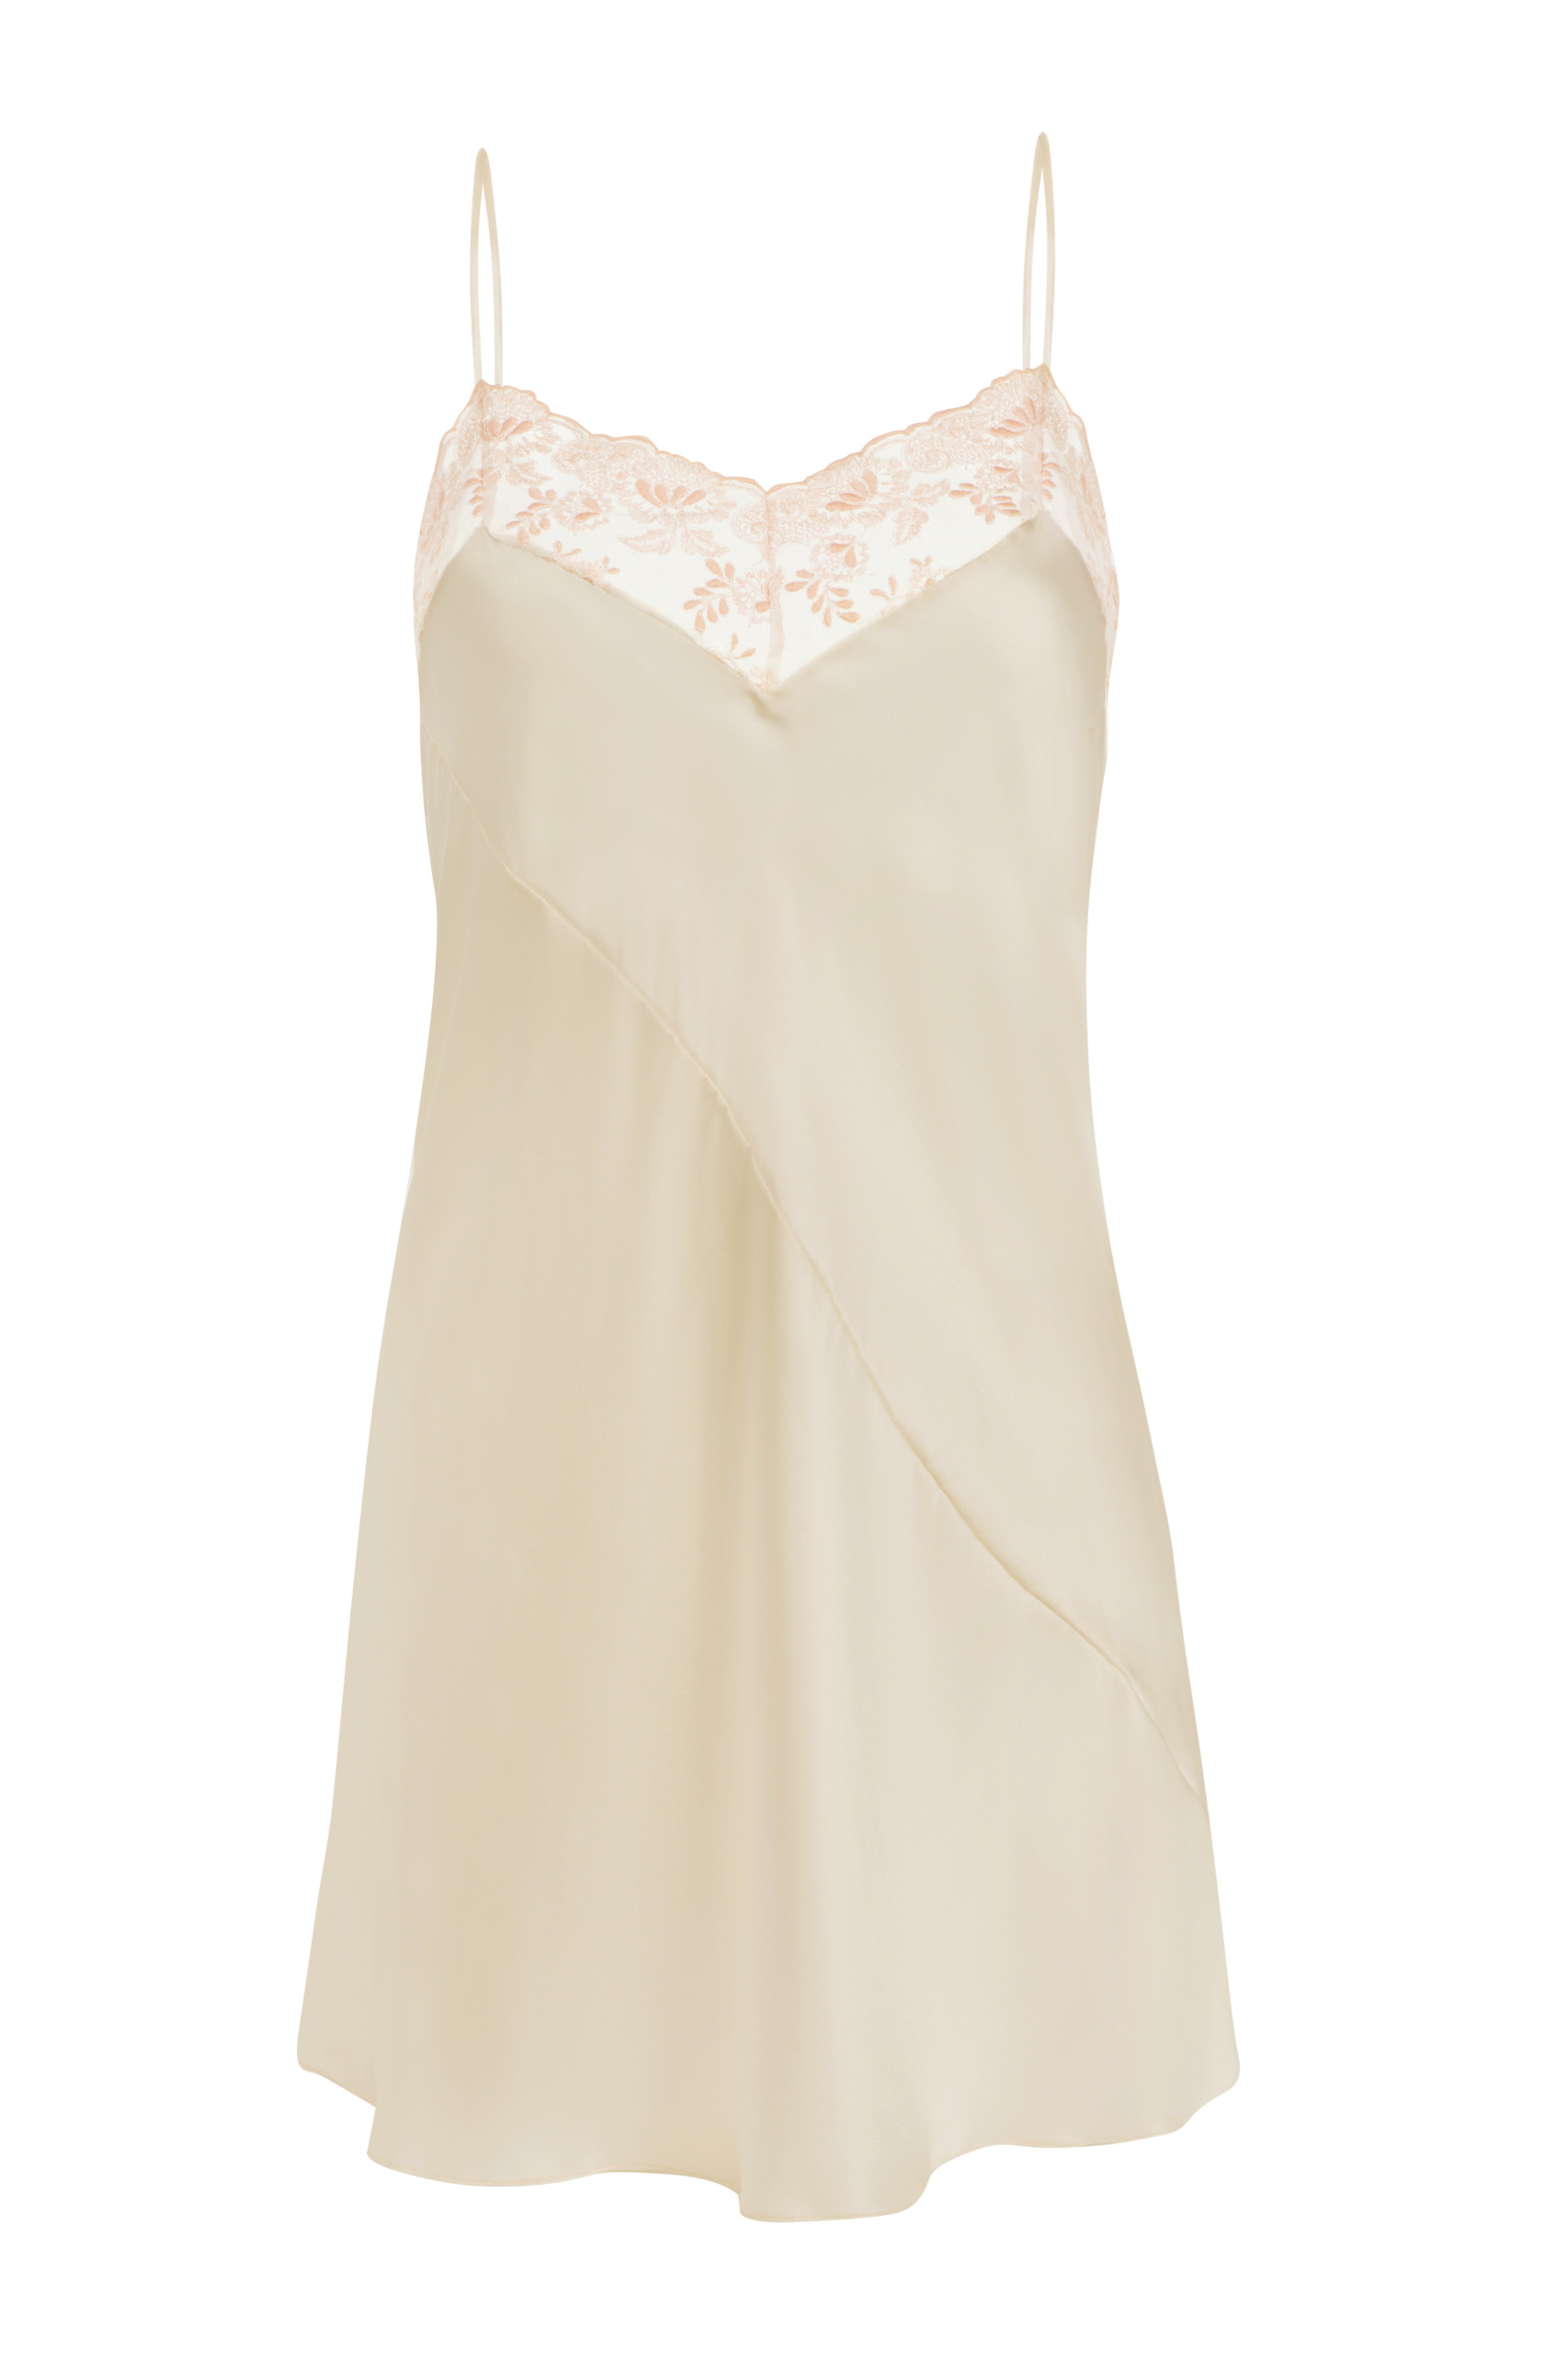 Pale peach Silk Slip Dress with lace. Handcrafted by Keturah Brown Lingerie